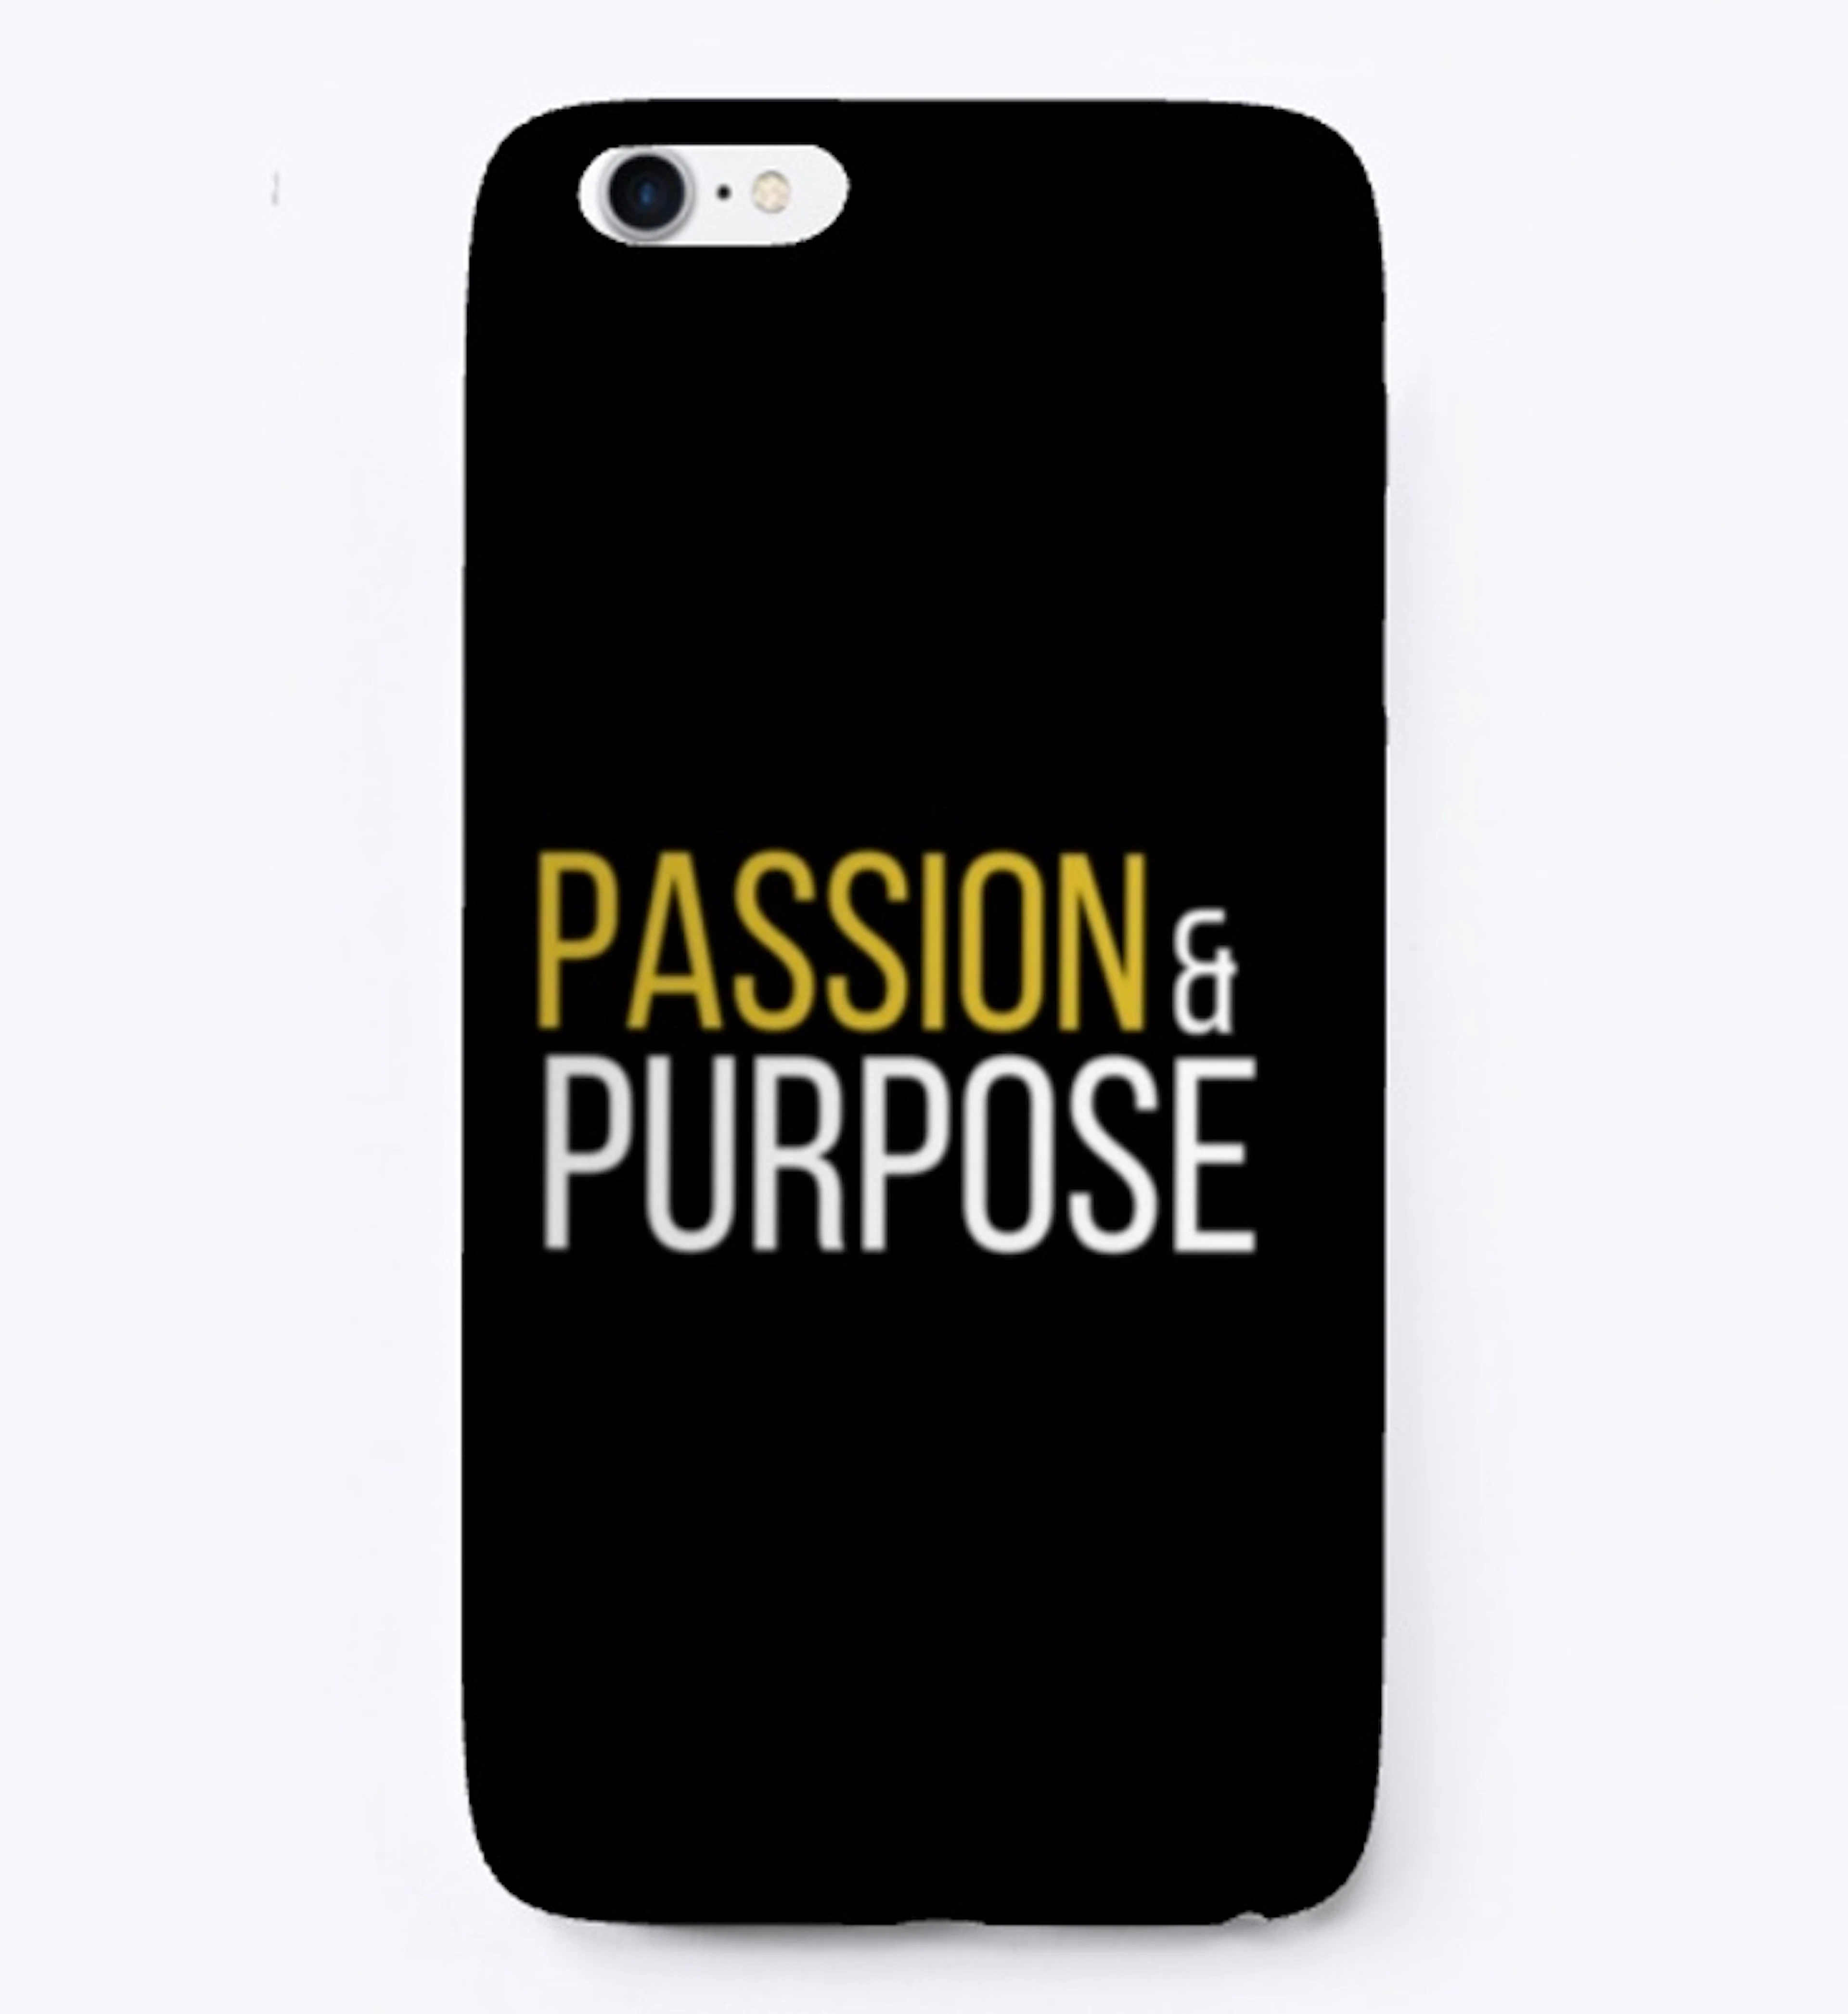 PASSION AND PURPOSE PHONE CASE